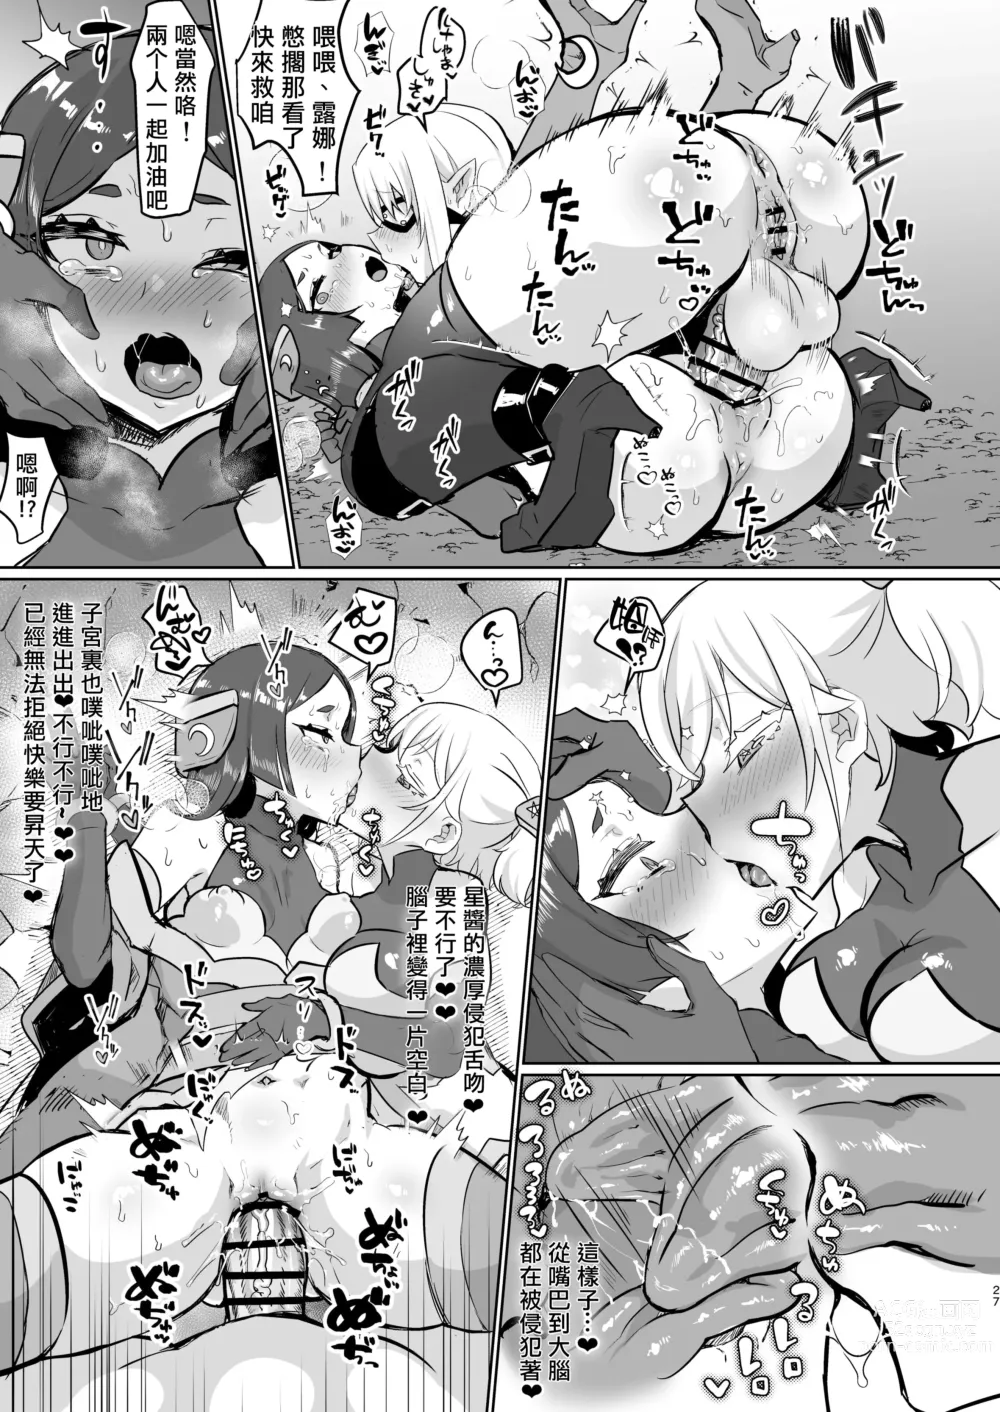 Page 27 of doujinshi 邪恶组织女干部正堕